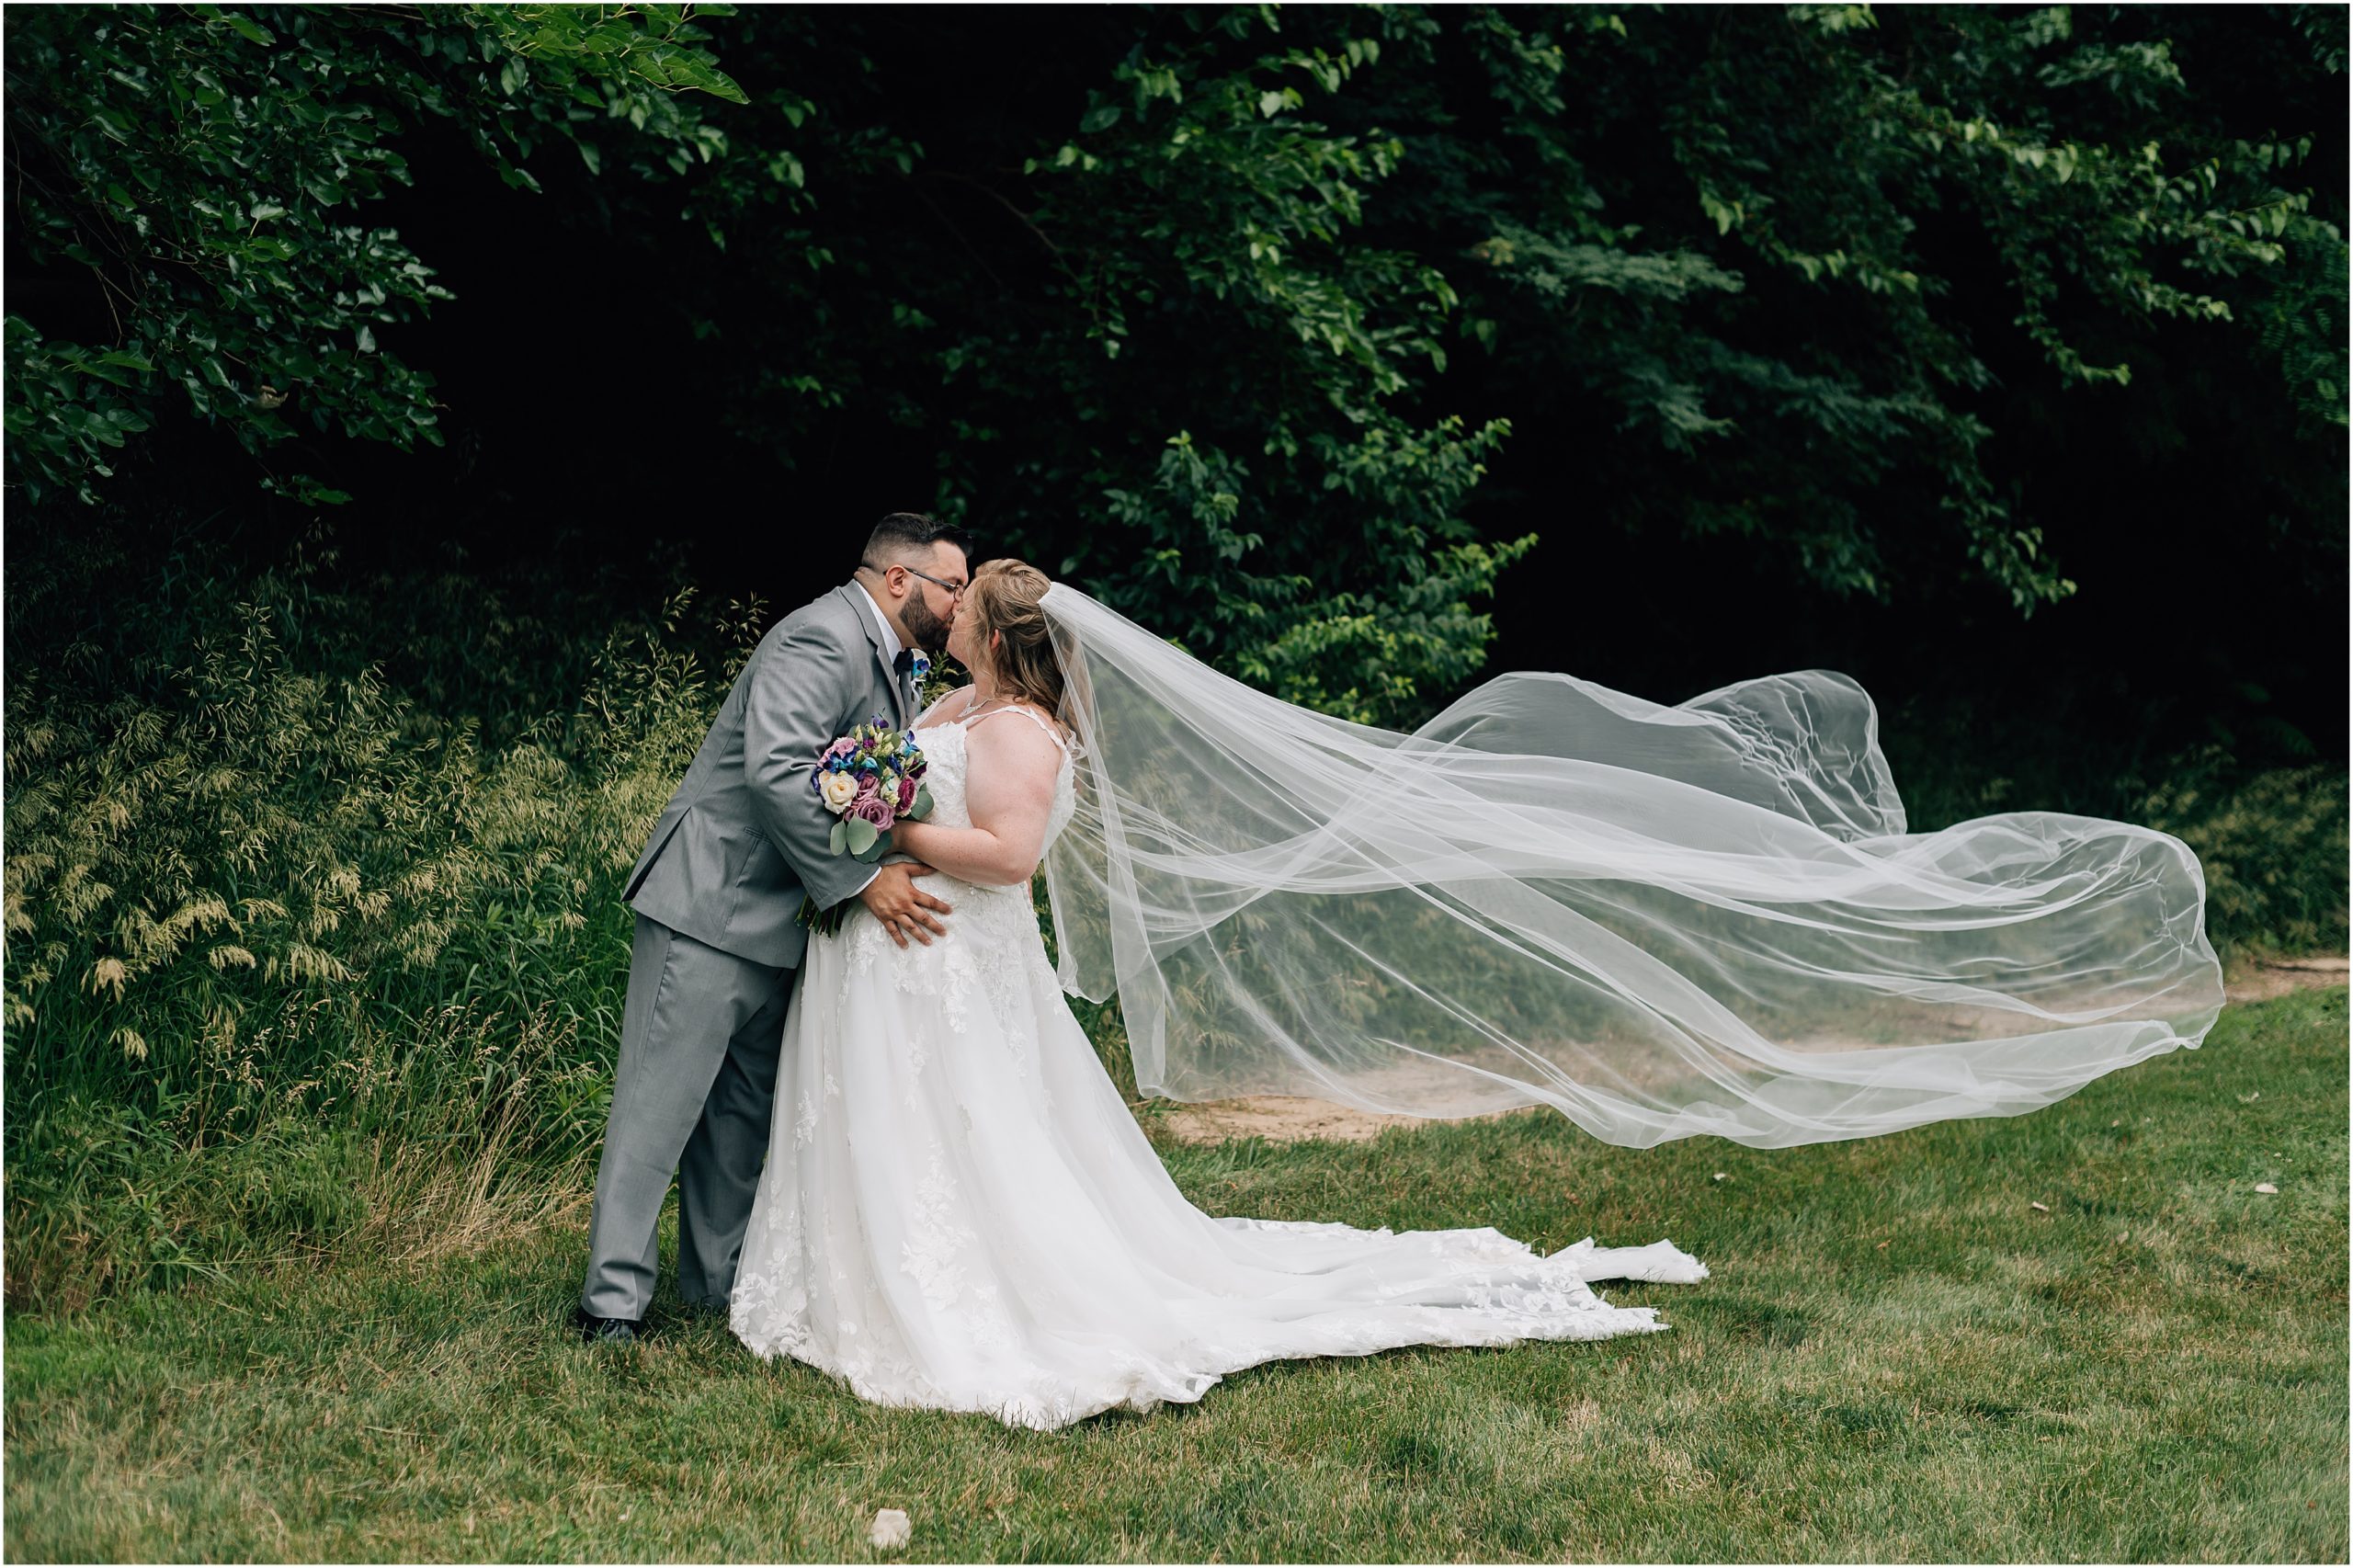 Bride, in white lace gown with cathedral length veil, and Groom, in a light grey suit, kiss while the bride's long veil blows in the wind. Photo taken at an Omaha wedding venue A View in Fontenelle Hills by Omaha wedding photographer Anna Brace.